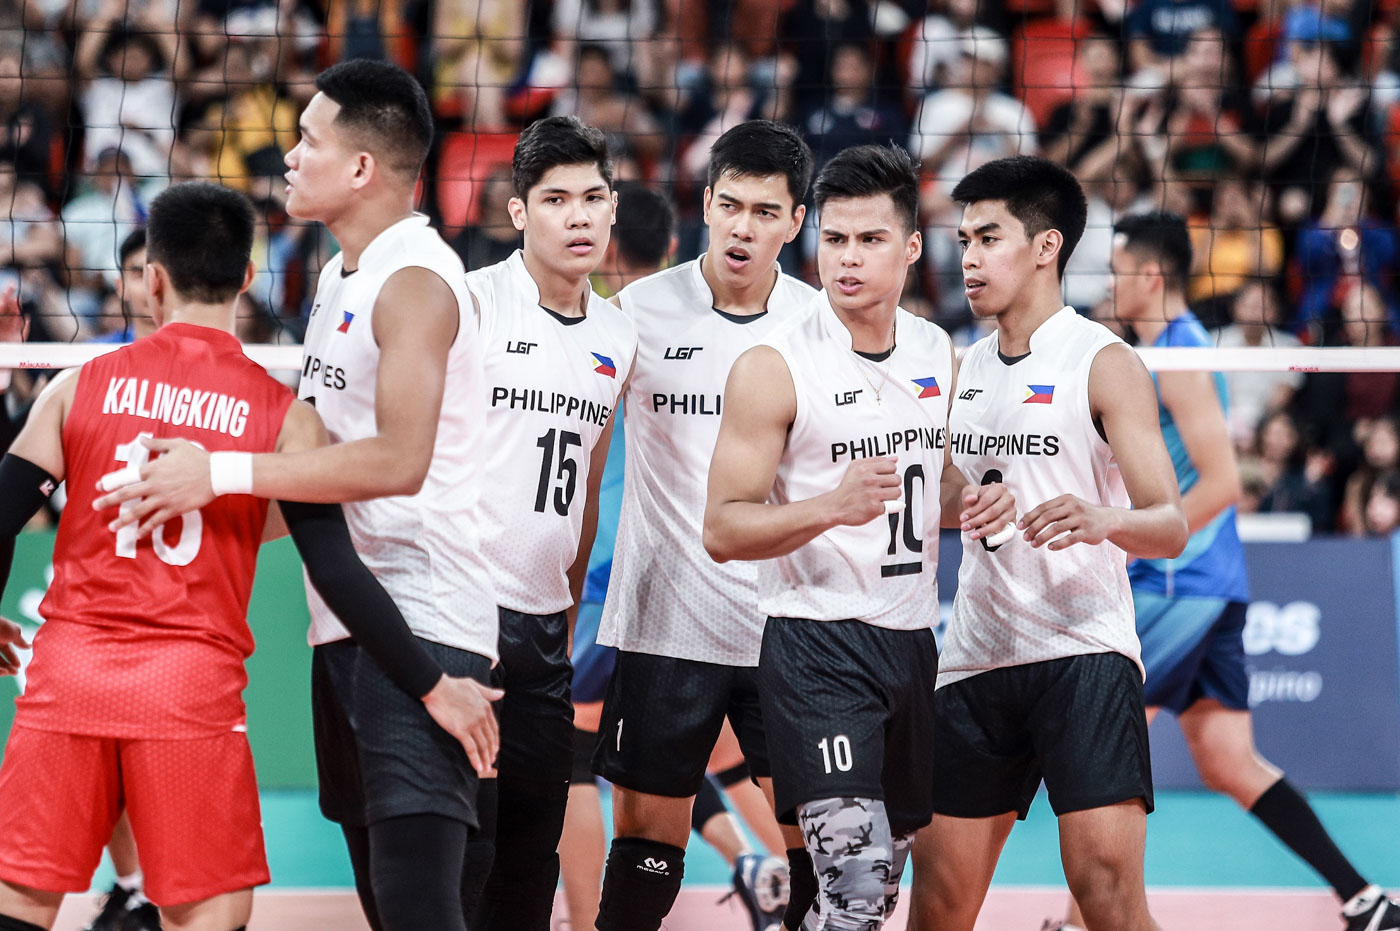 OVERACHIEVERS. The Filipino spikers pull off a SEA Games surprise. Photo by Michael Gatpandan/Rappler 